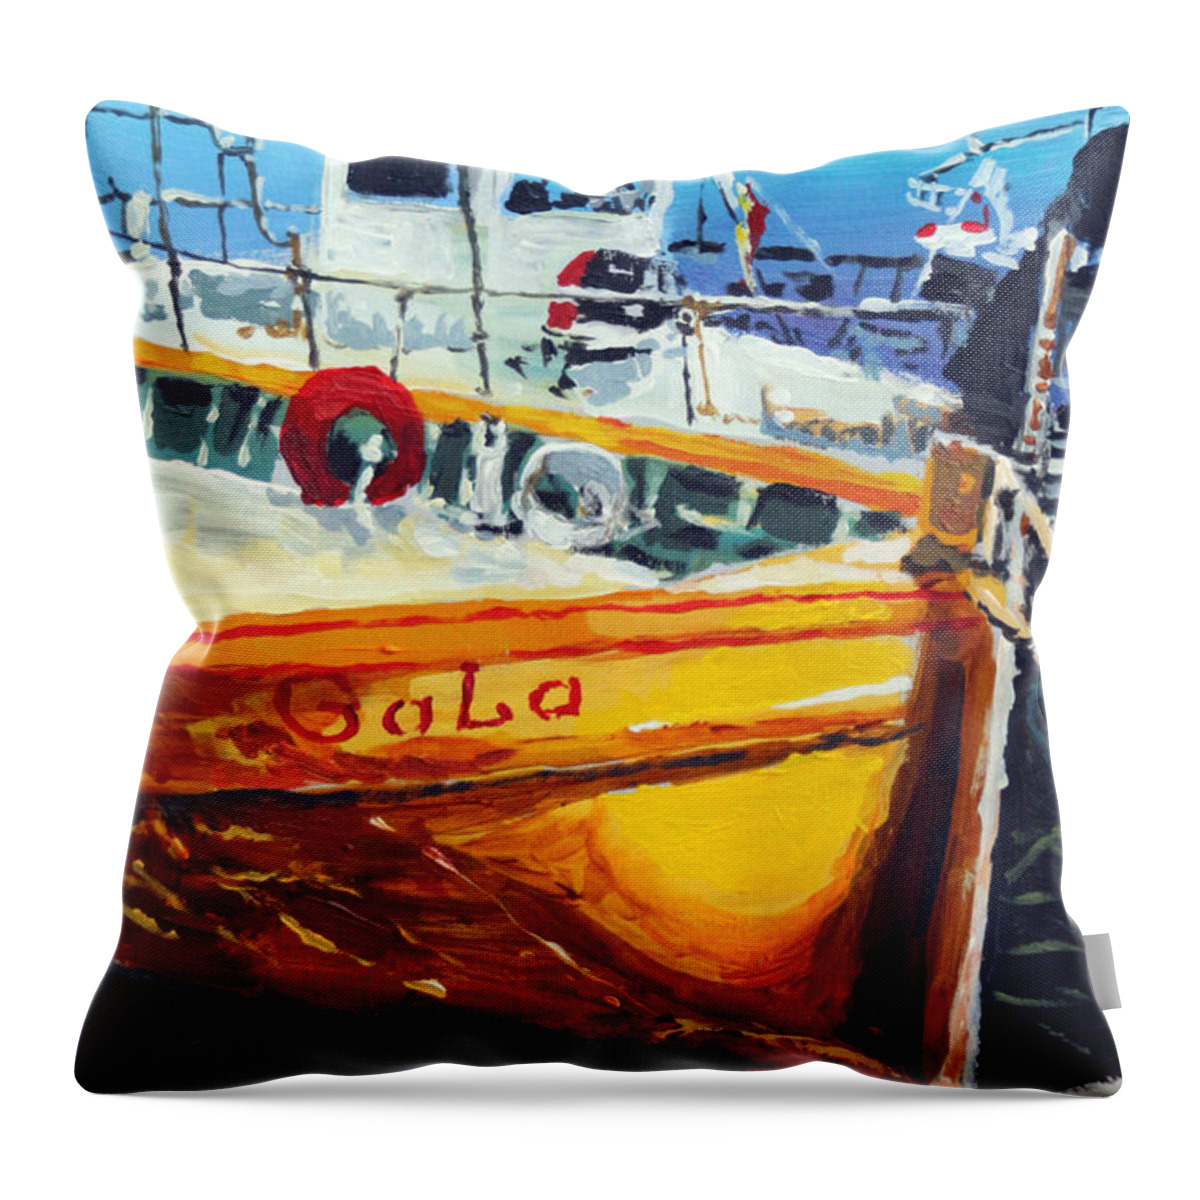 Acrylic On Paper Throw Pillow featuring the painting Spain Series 01 Cadaques Portlligat by Yuriy Shevchuk